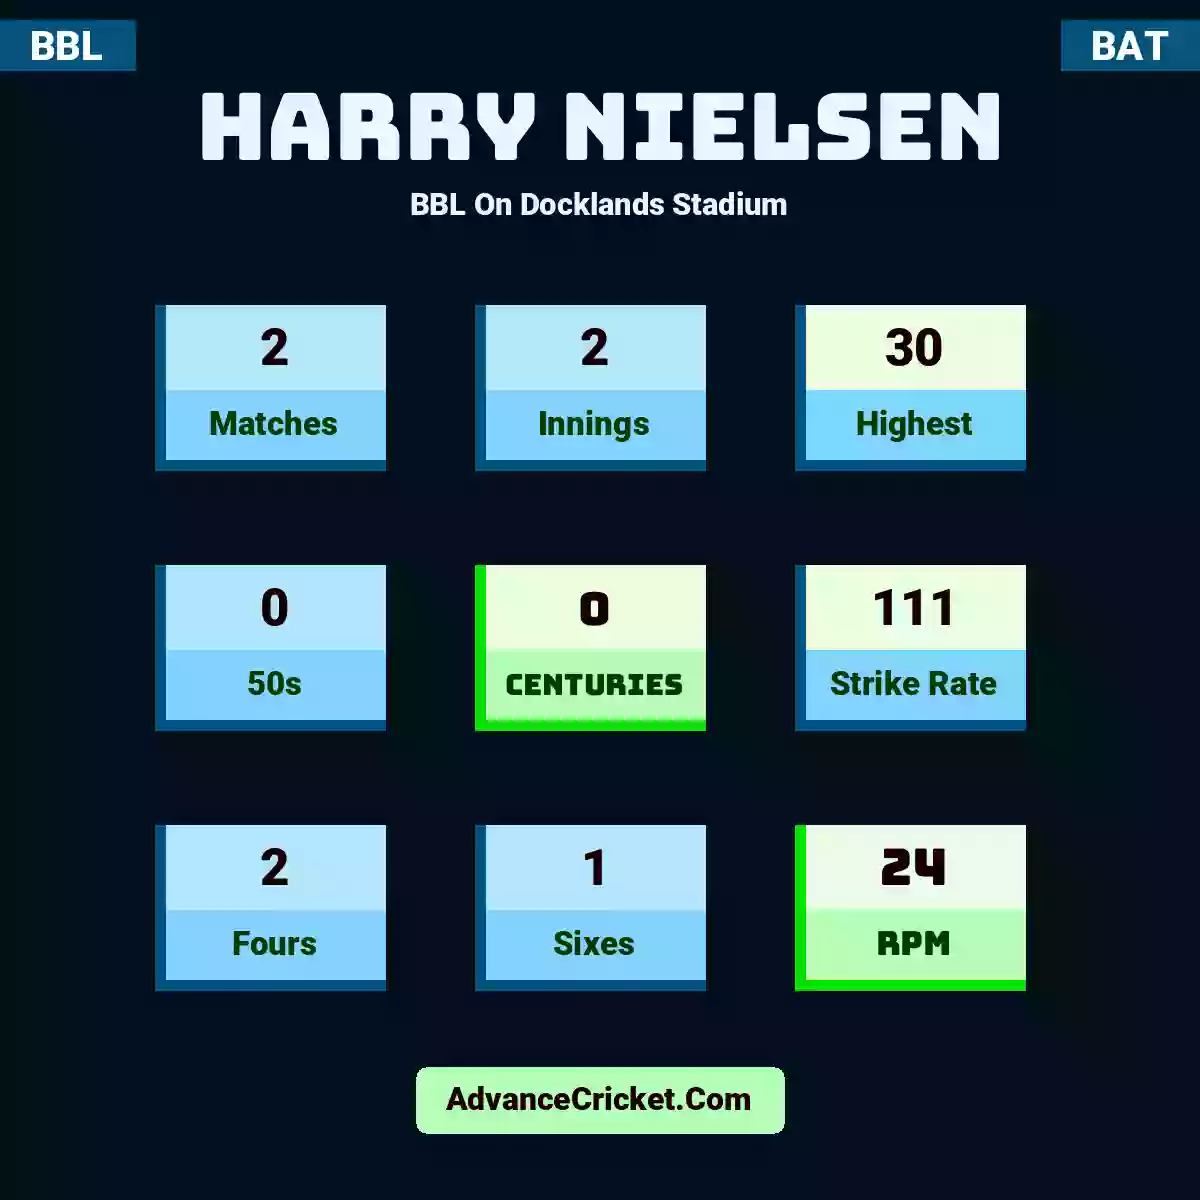 Harry Nielsen BBL  On Docklands Stadium, Harry Nielsen played 2 matches, scored 30 runs as highest, 0 half-centuries, and 0 centuries, with a strike rate of 111. H.Nielsen hit 2 fours and 1 sixes, with an RPM of 24.